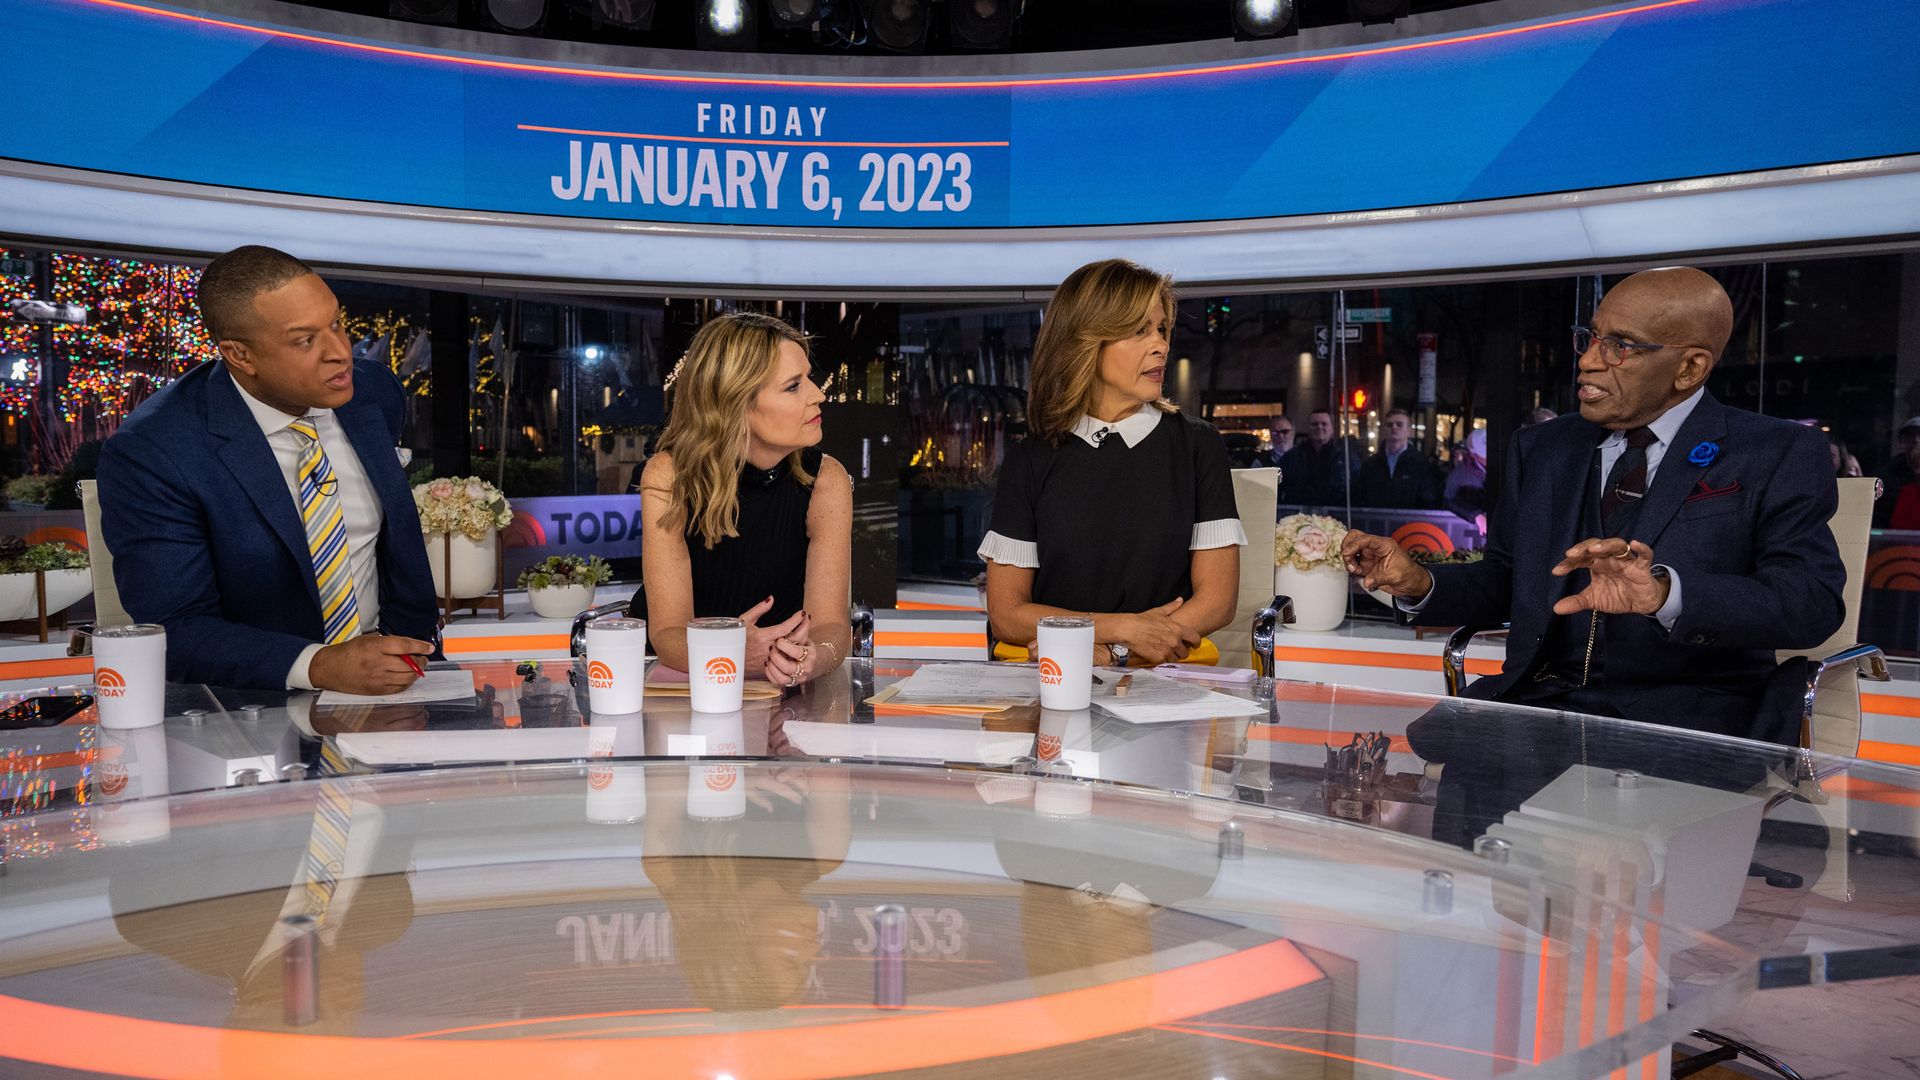 Hoda Kotb and Savannah Guthrie are confused by surprising Princess Kate moment on Today - watch